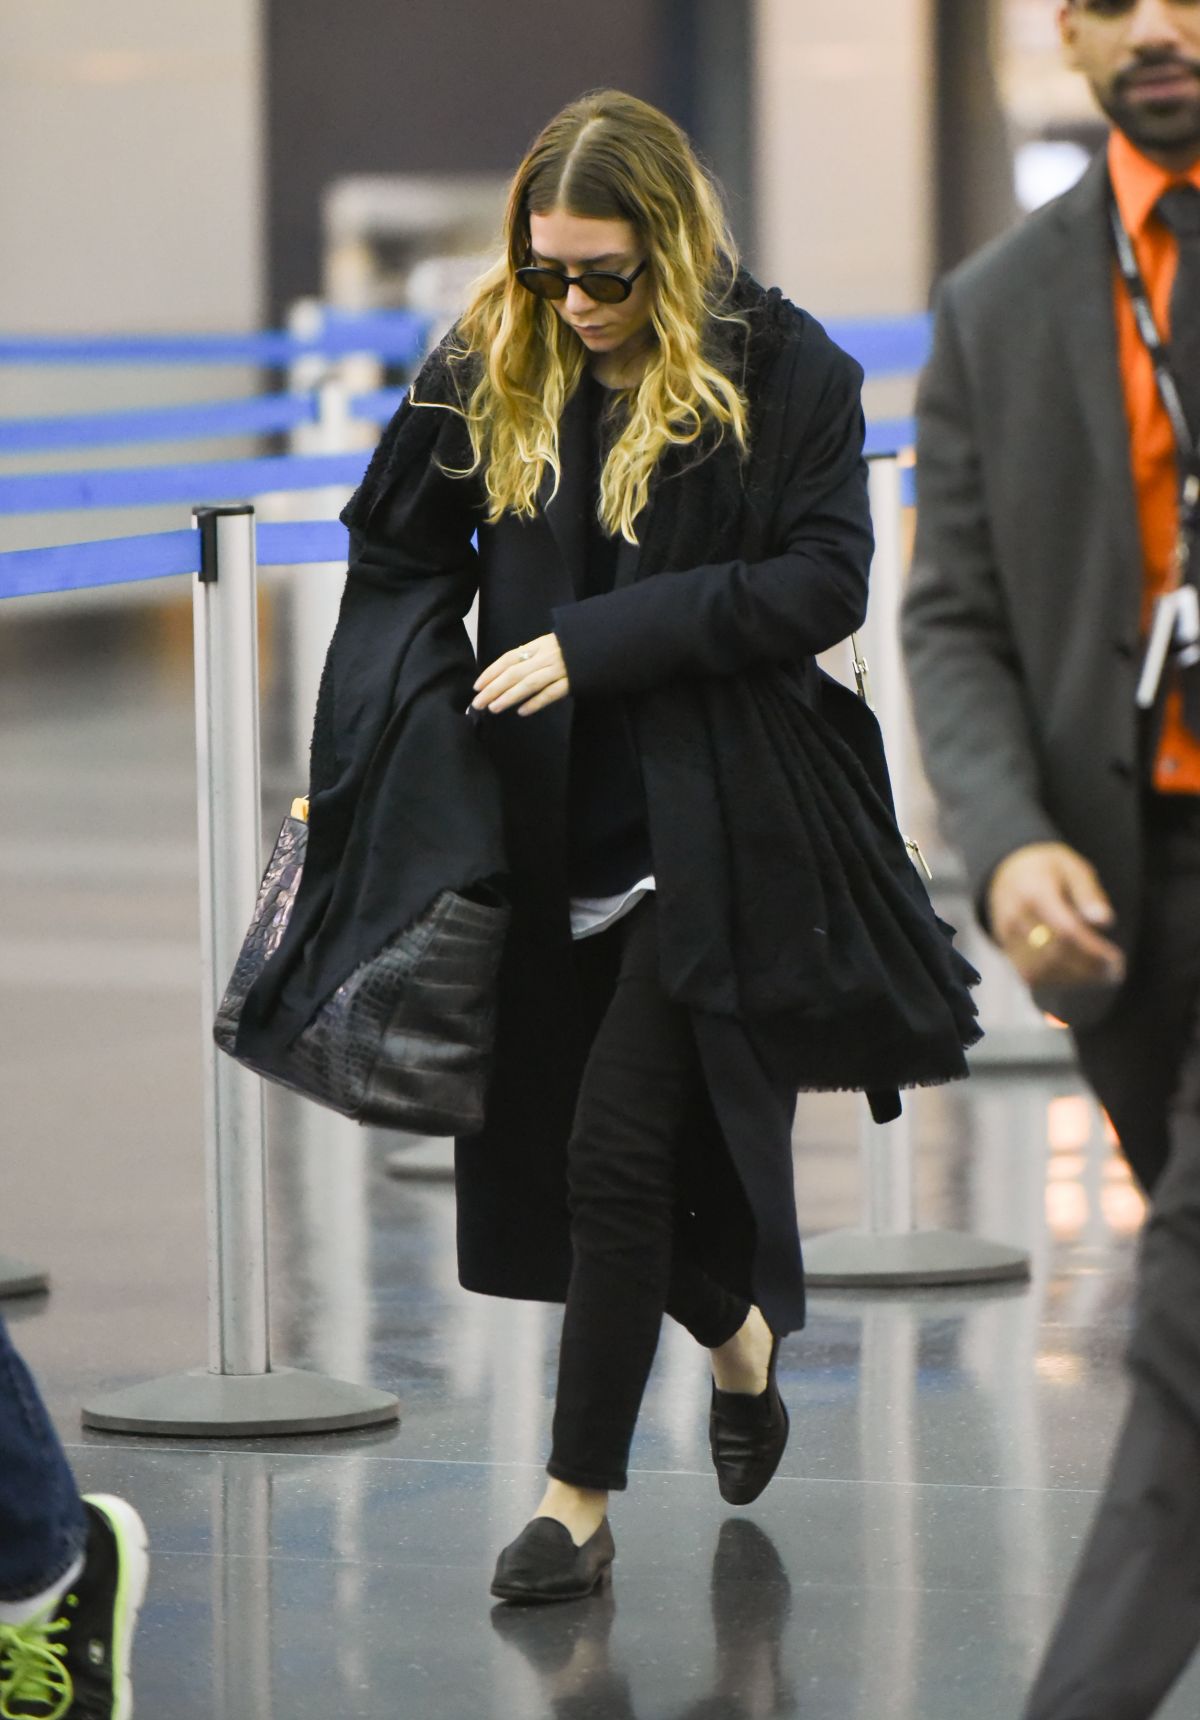 MARY KATE OLSEN at JFK Airport in New York – HawtCelebs